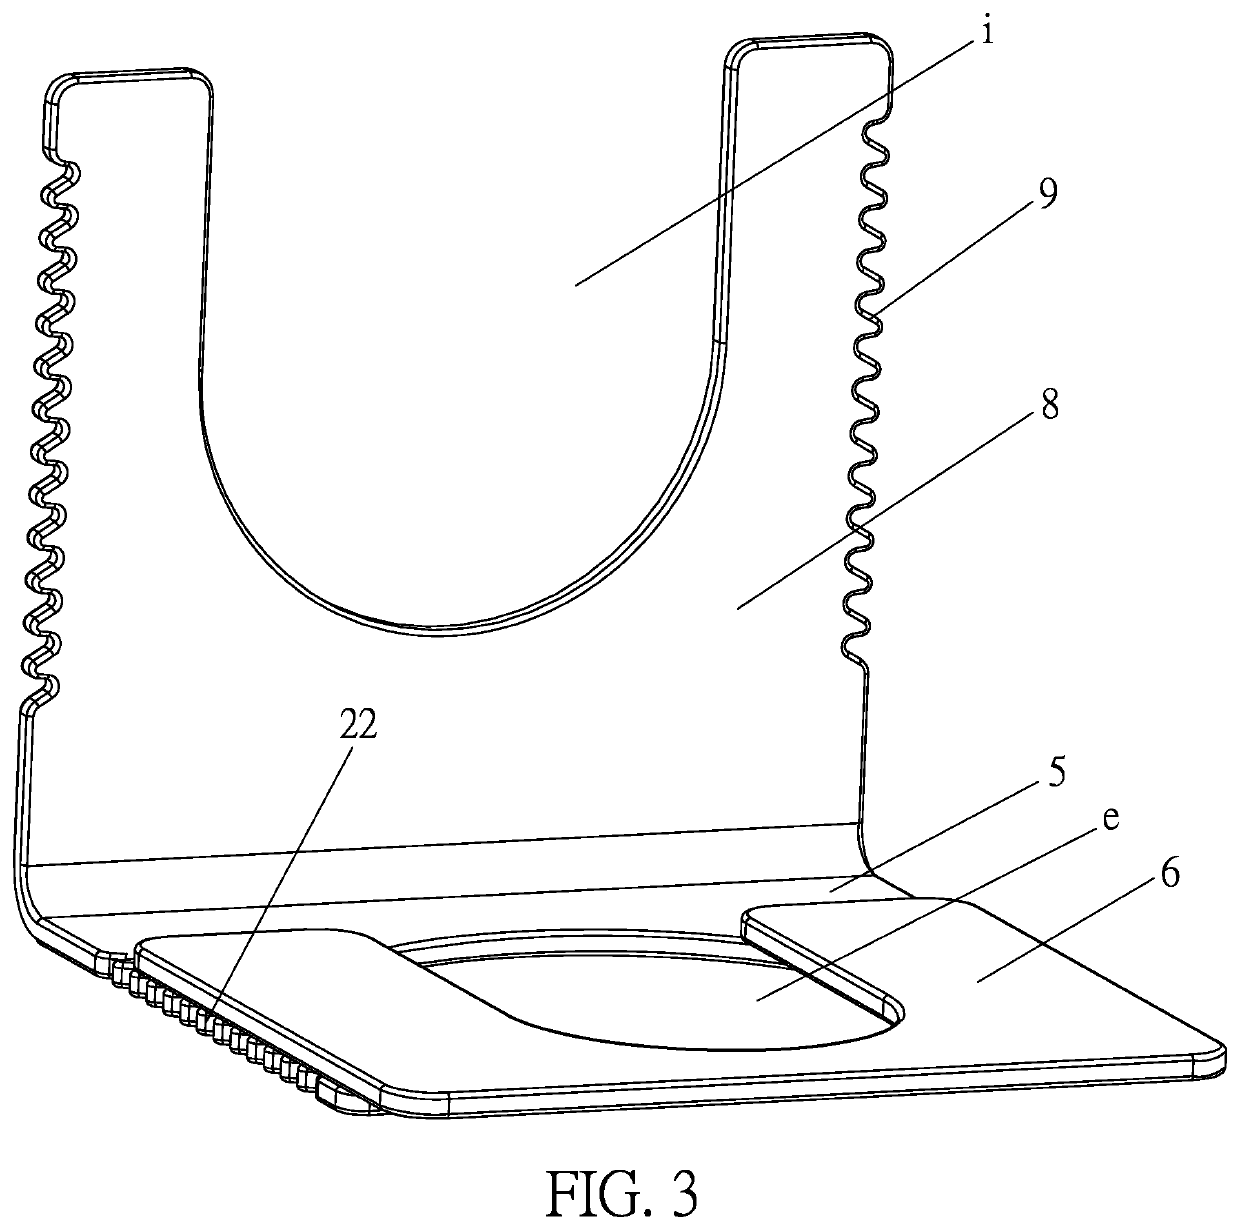 Intelligent extruding device for supplying cleaning and caring articles